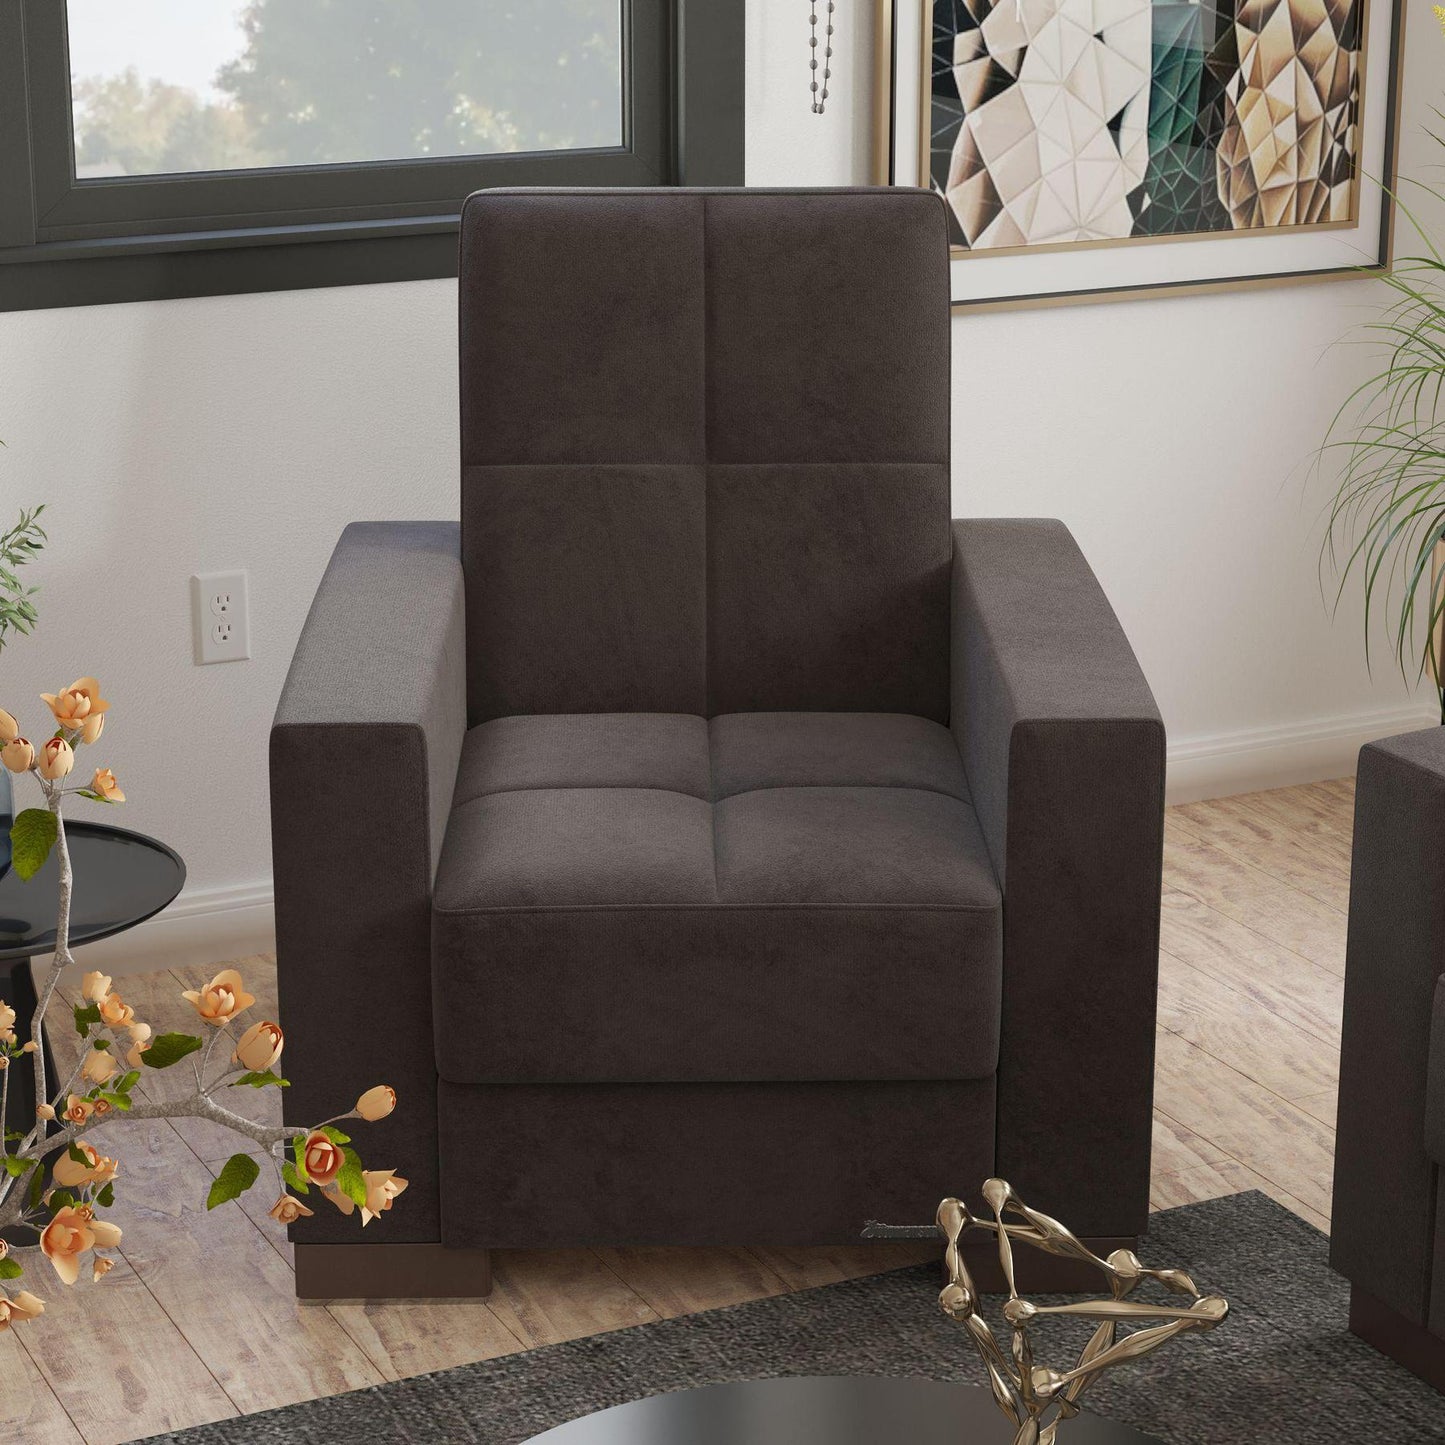 Modern design, Friar Brown , Microfiber upholstered convertible Armchair with underseat storage from Voyage Track by Ottomanson in living room lifestyle setting by itself. This Armchair measures 38 inches width by 36 inches depth by 41 inches height.